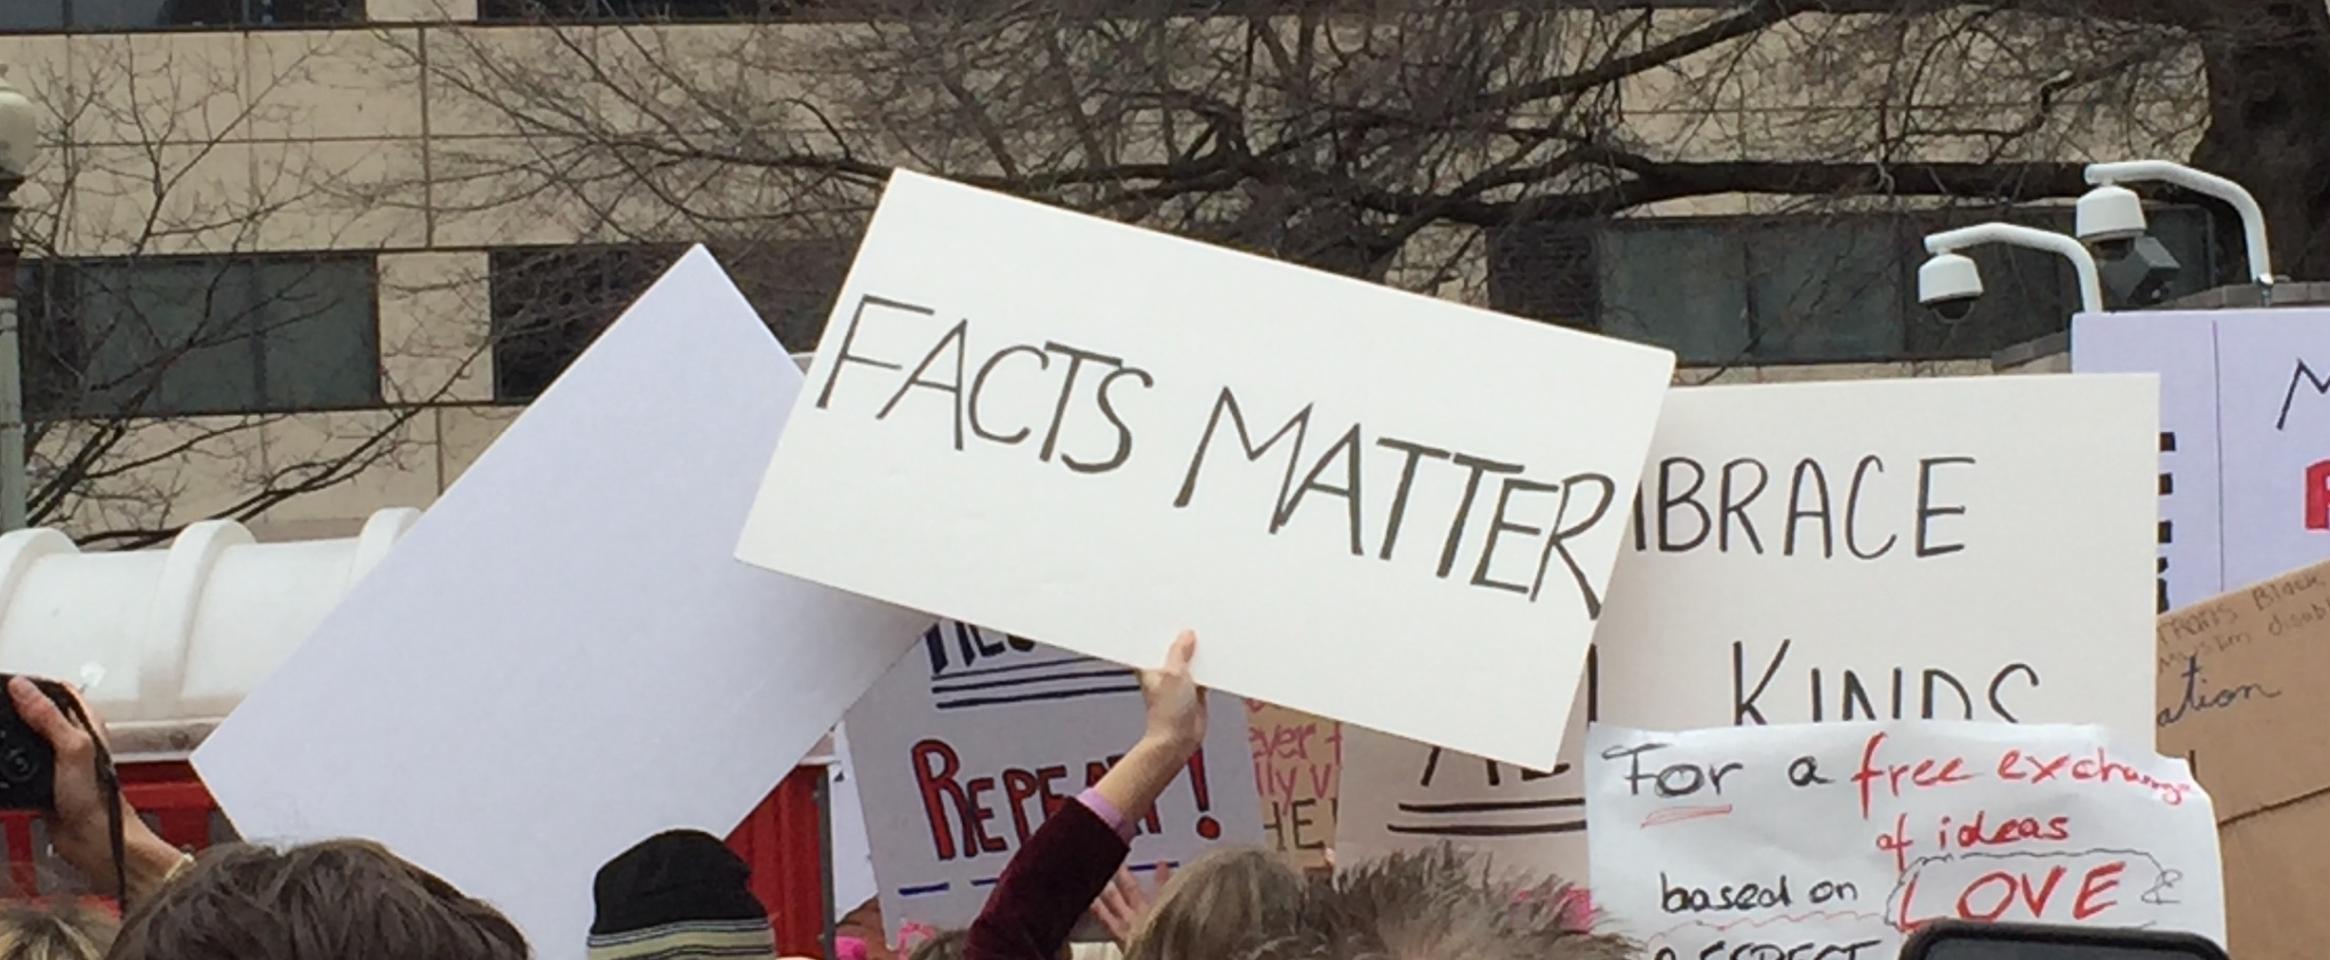 Rectangular photo of Women’s March in Washington DC, January 21, 2017, with signs reading “Facts Matter.” Photo credit Brooke Borel.